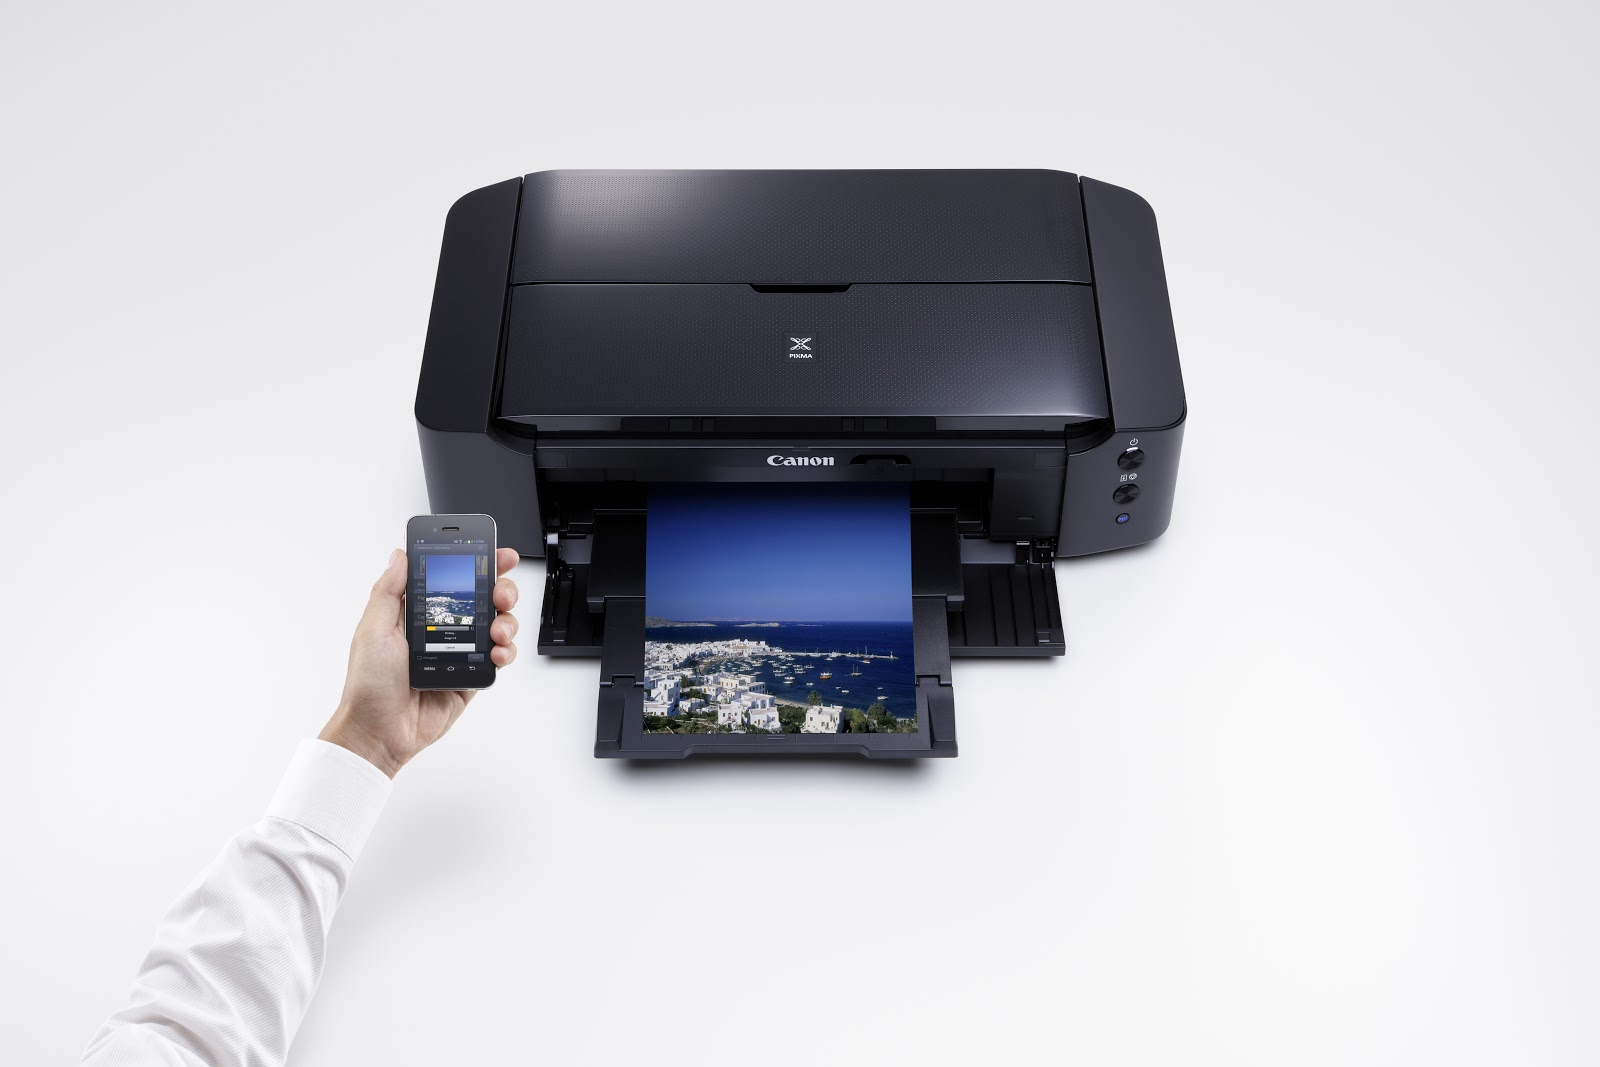 Smart print from your device